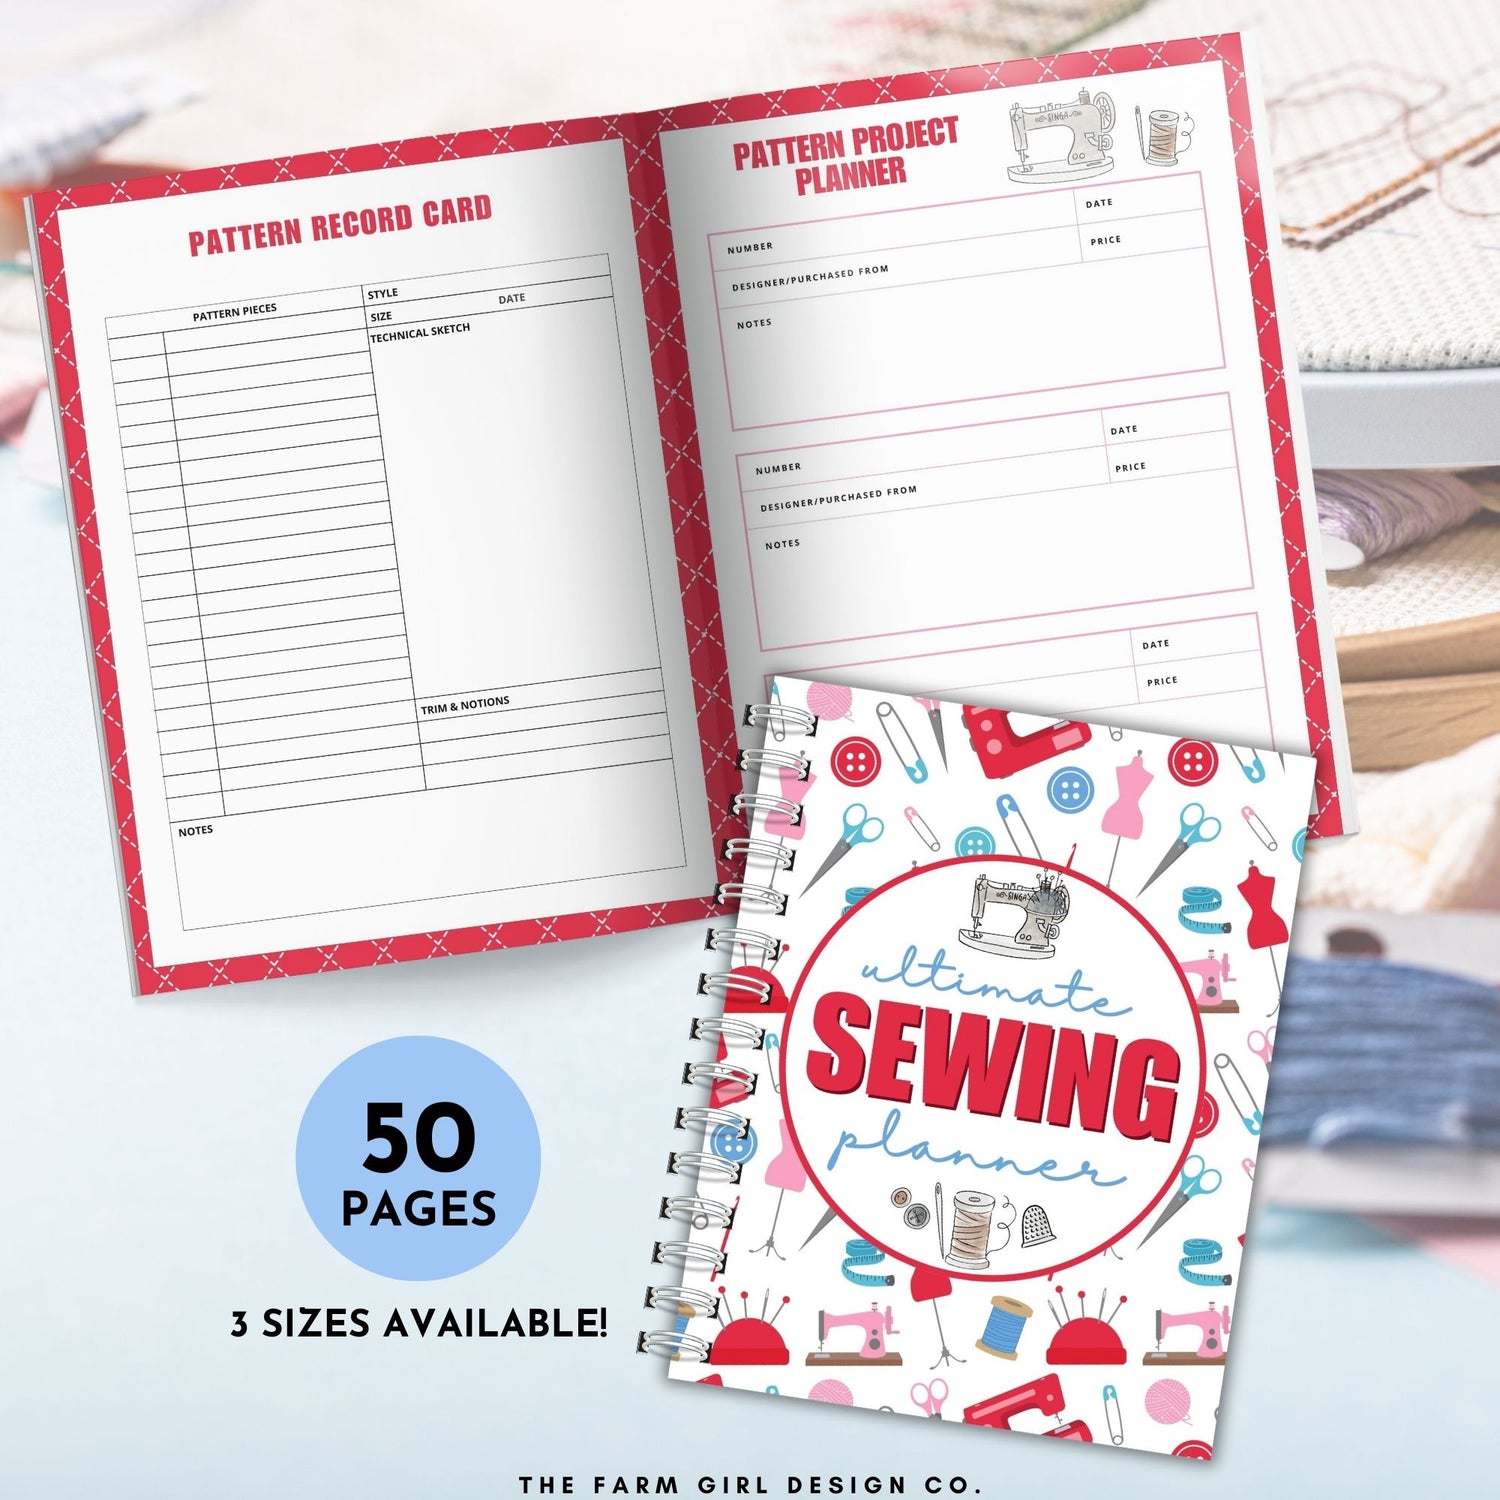 Elevate your sewing and crafting experience with our 50-page Sewing Projects Planner printable, available in three convenient sizes: US Letter, A4, and A5. This comprehensive sewing planner is designed to be your go-to tool for seamless project planning and organization.